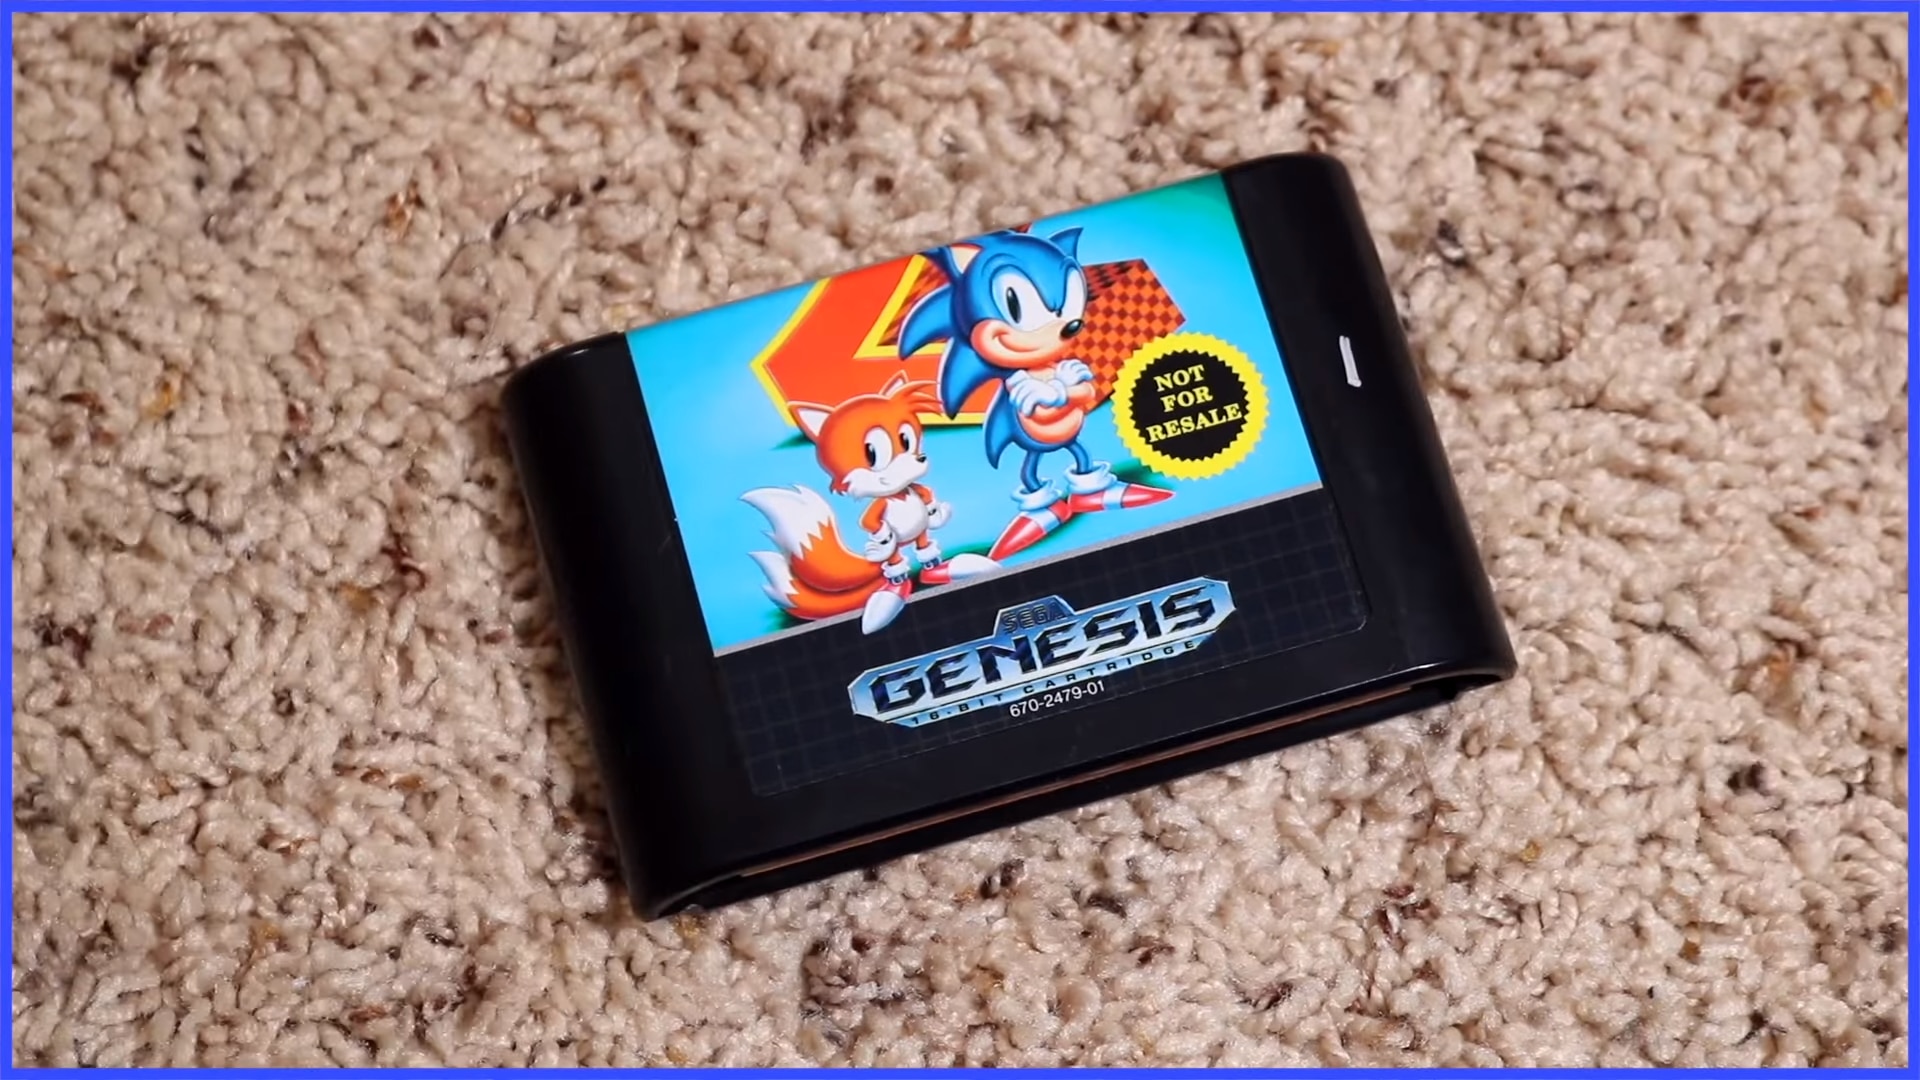 After 1 month of waiting for it, my Sonic Classic Heroes cartridge